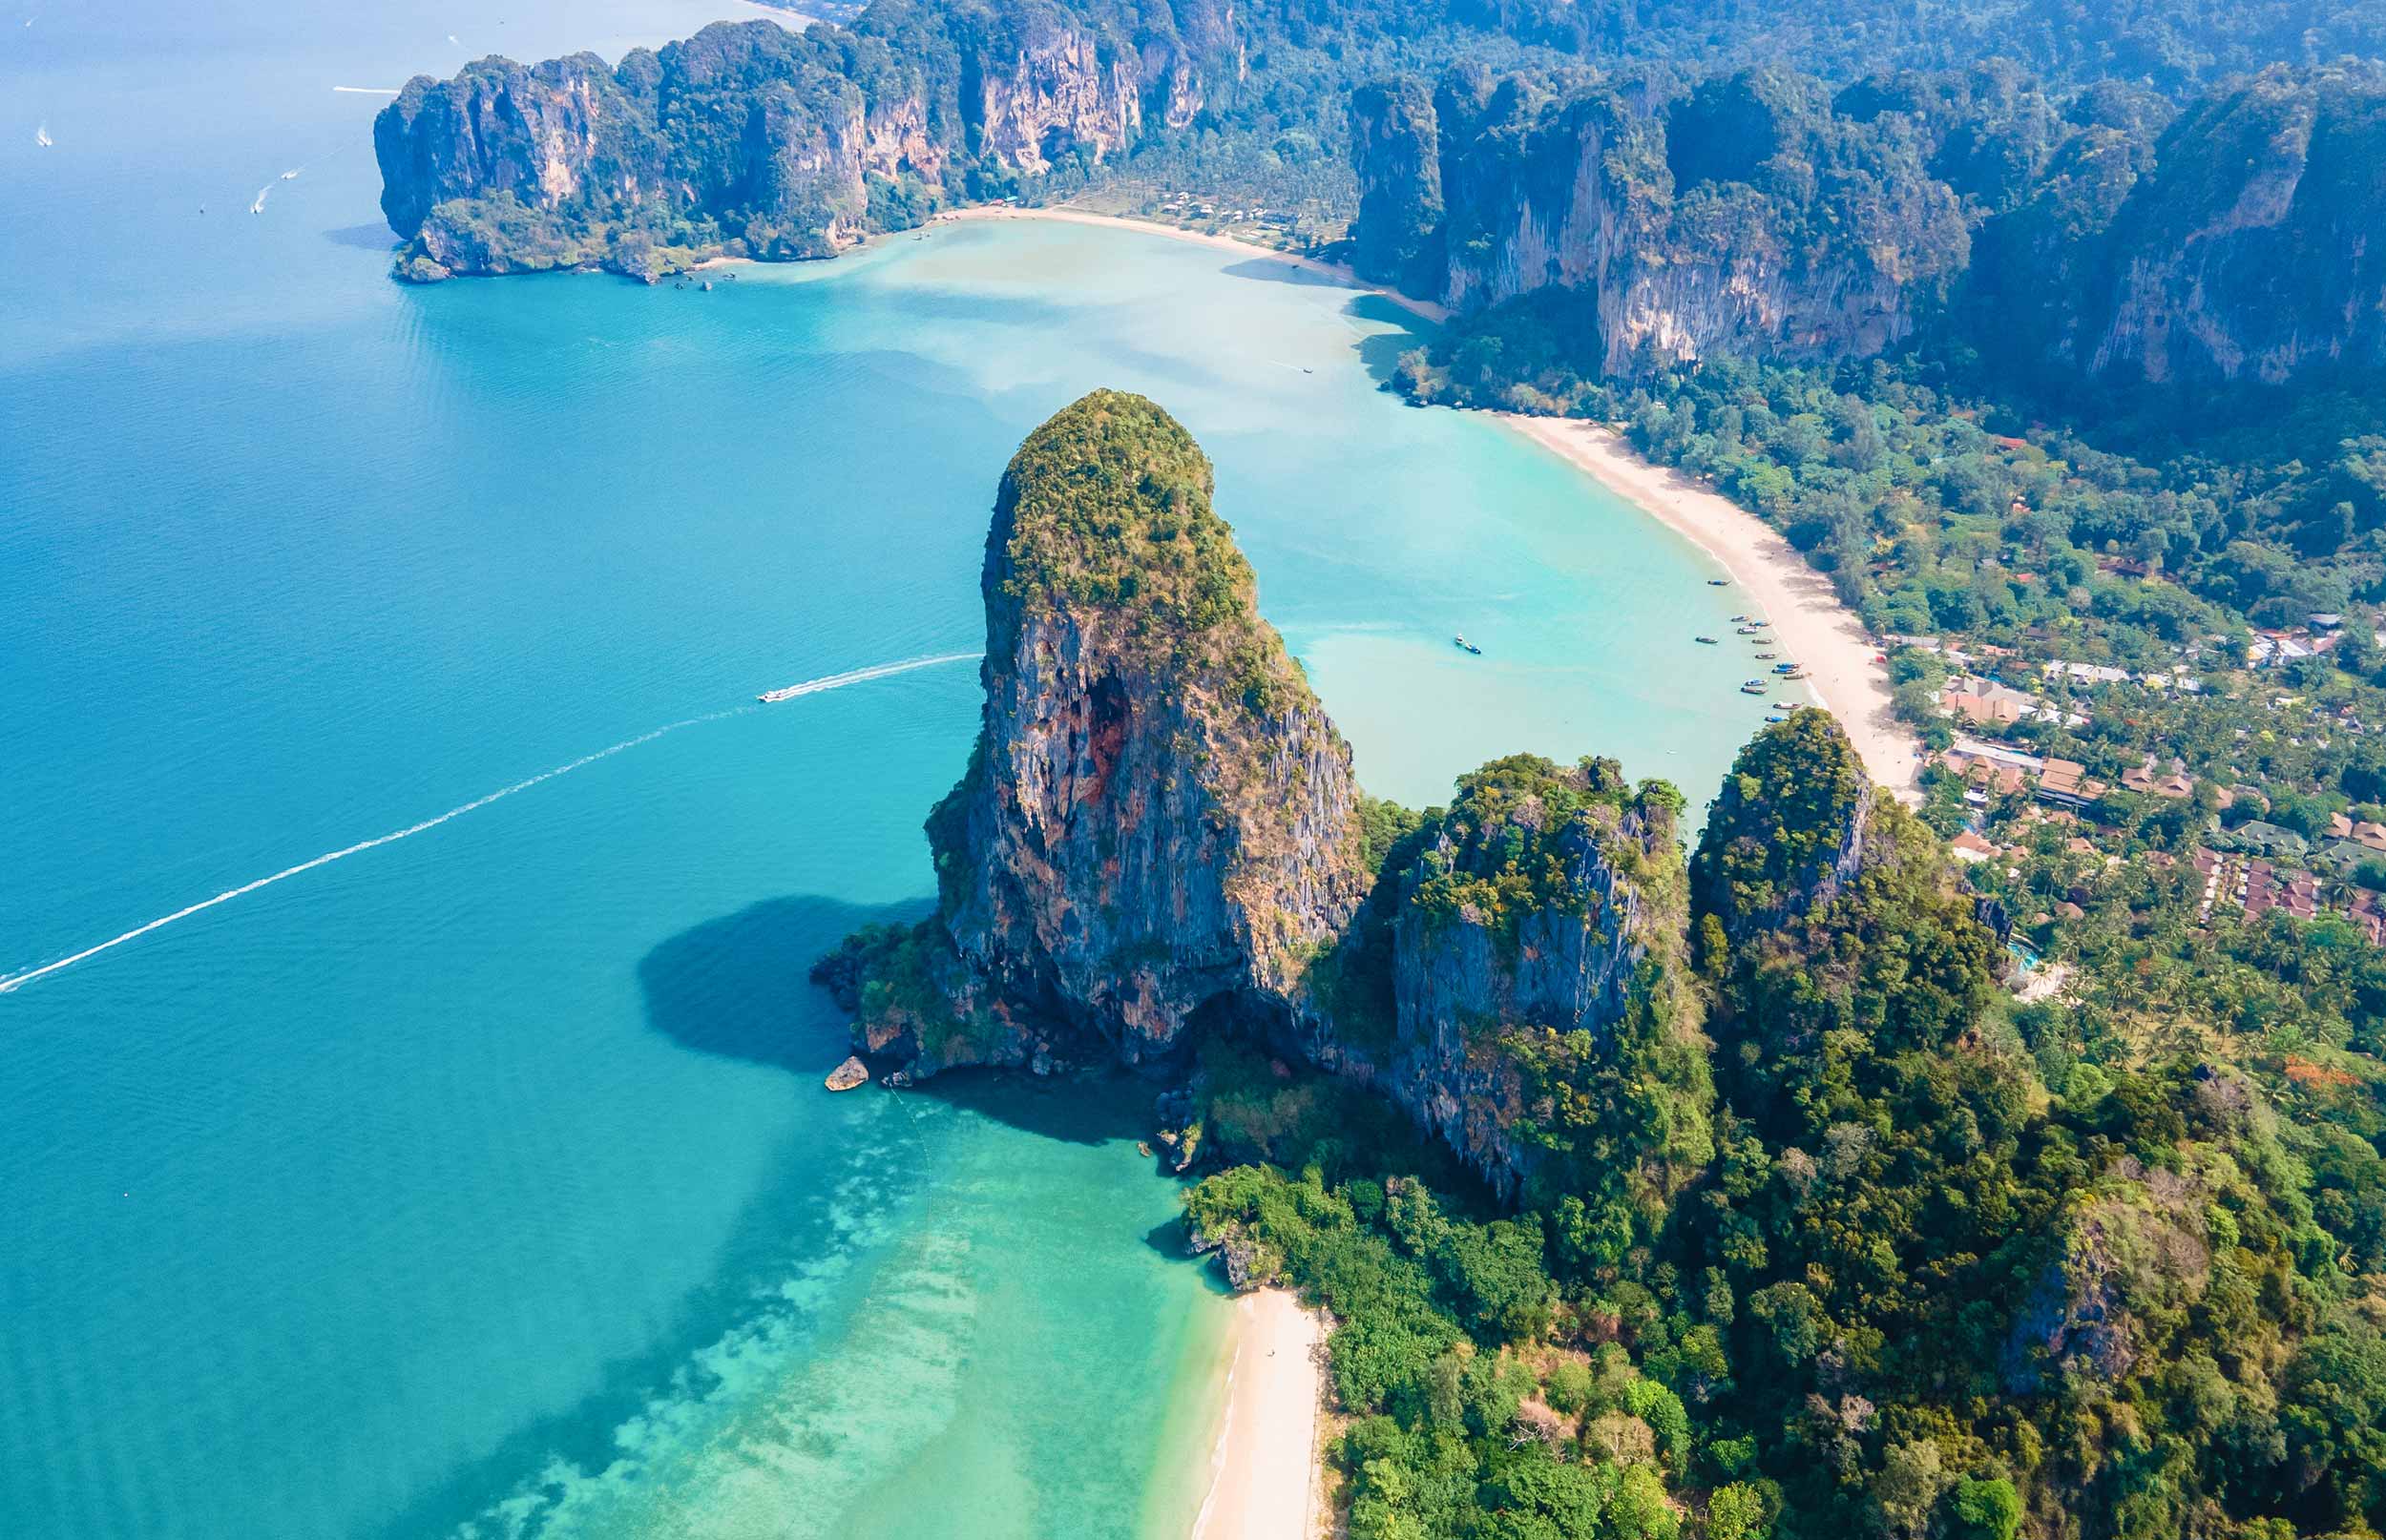 Day 6: Thailand in all its beauty - Railay Beach 😍